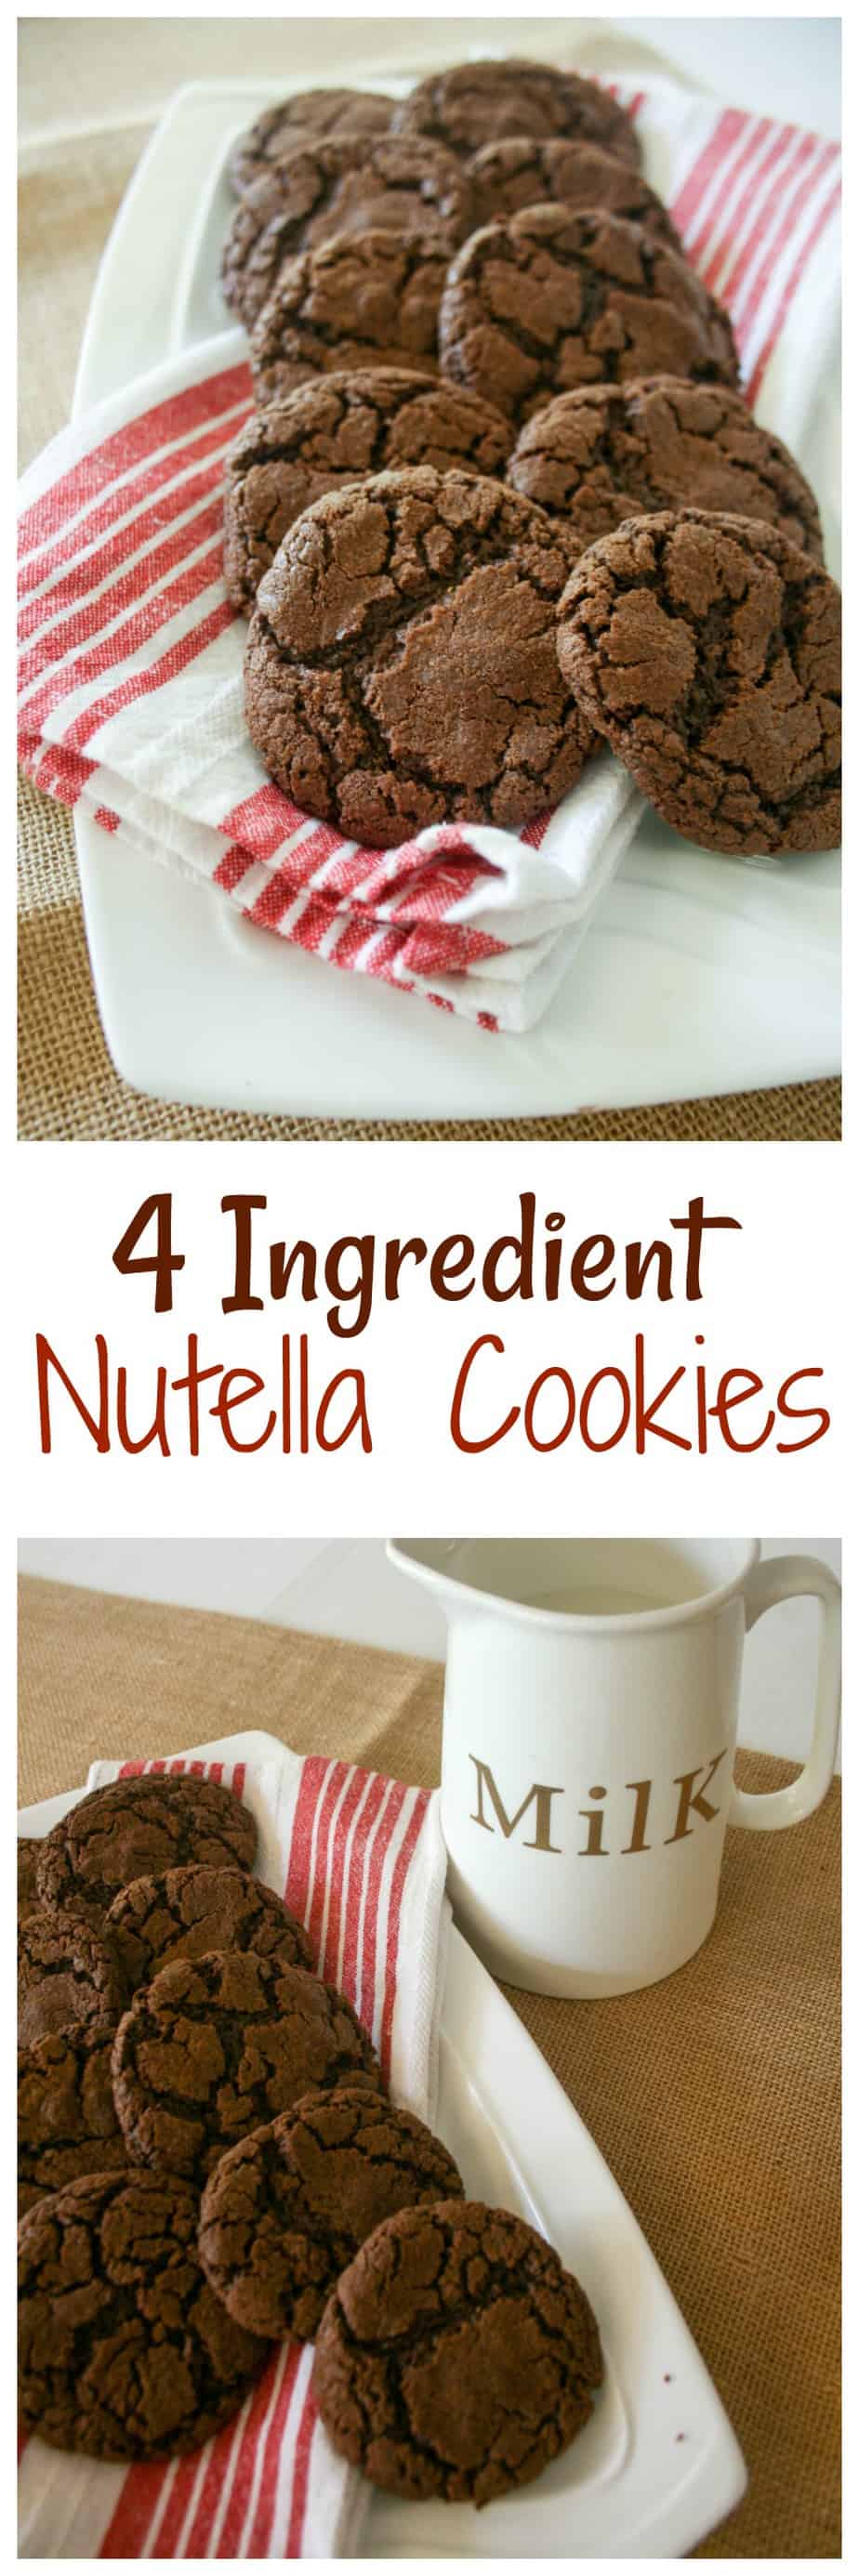 4 Ingredient Nutella Cookies are the simplest, yest most delicious chocolate cookie you will ever taste. So easy to make and perfect for kids to help in the kitchen!